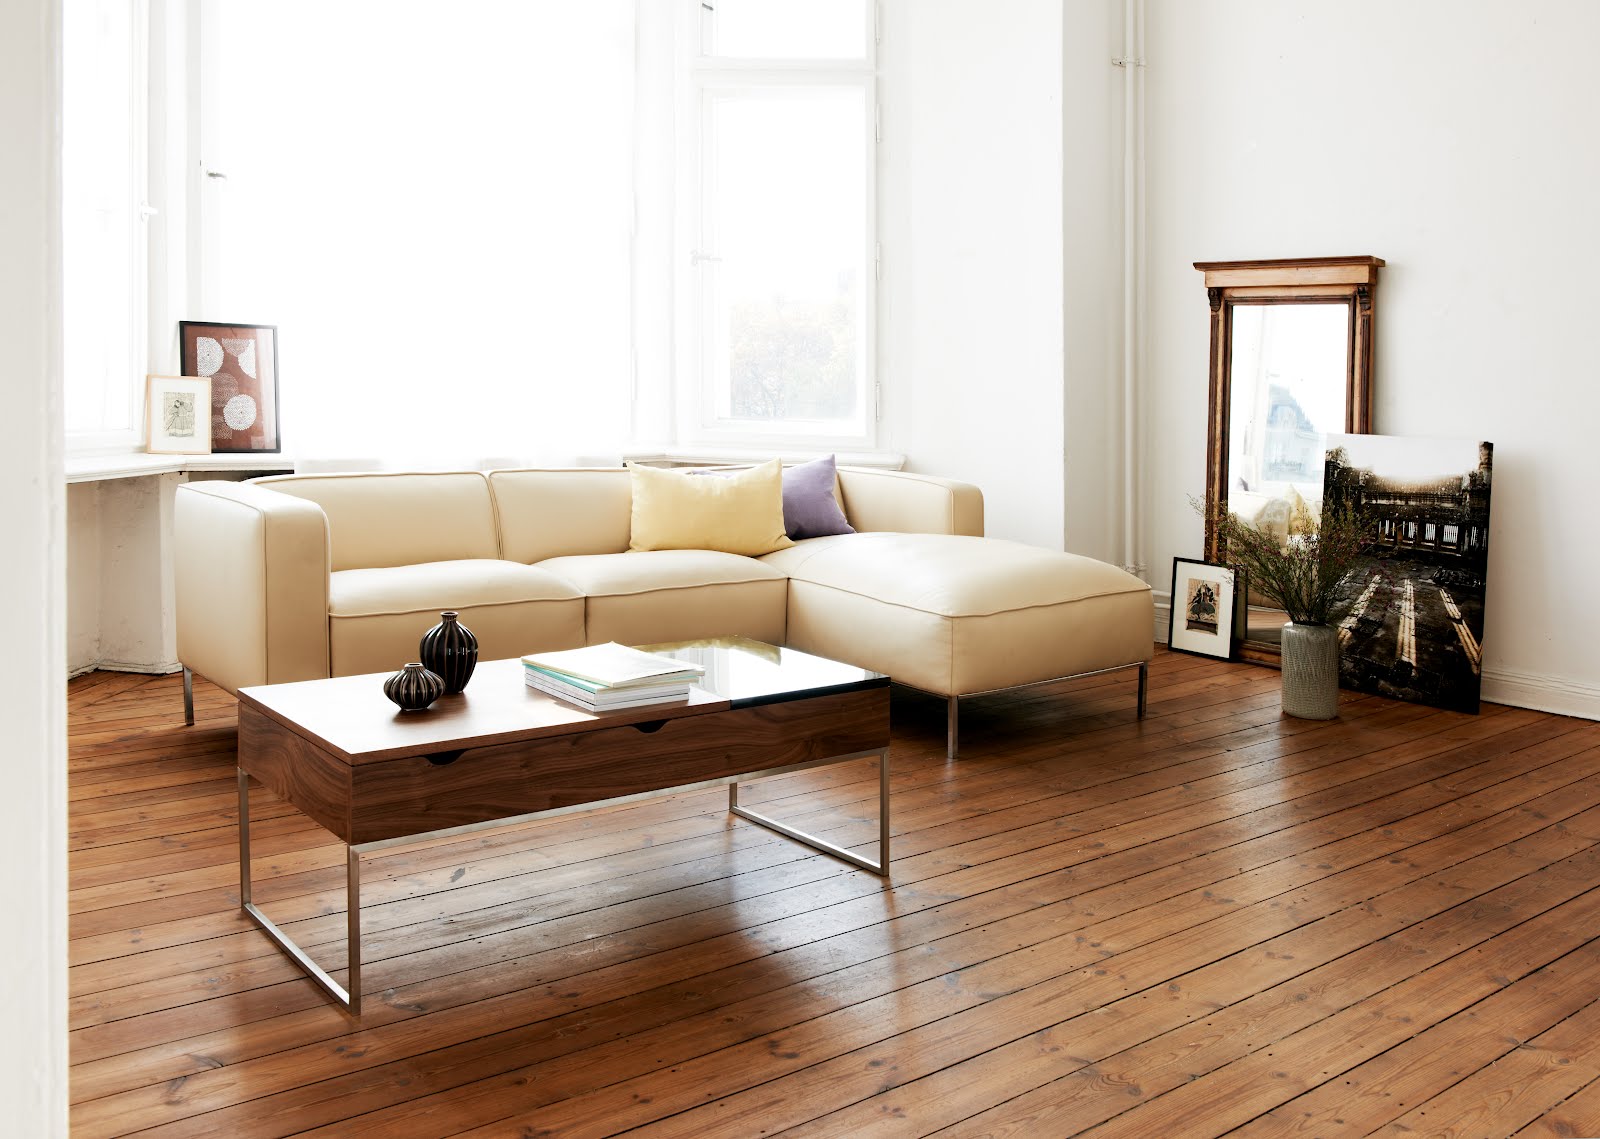 Things One Should Keep In Mind While Going For Affordable Modern Furniture